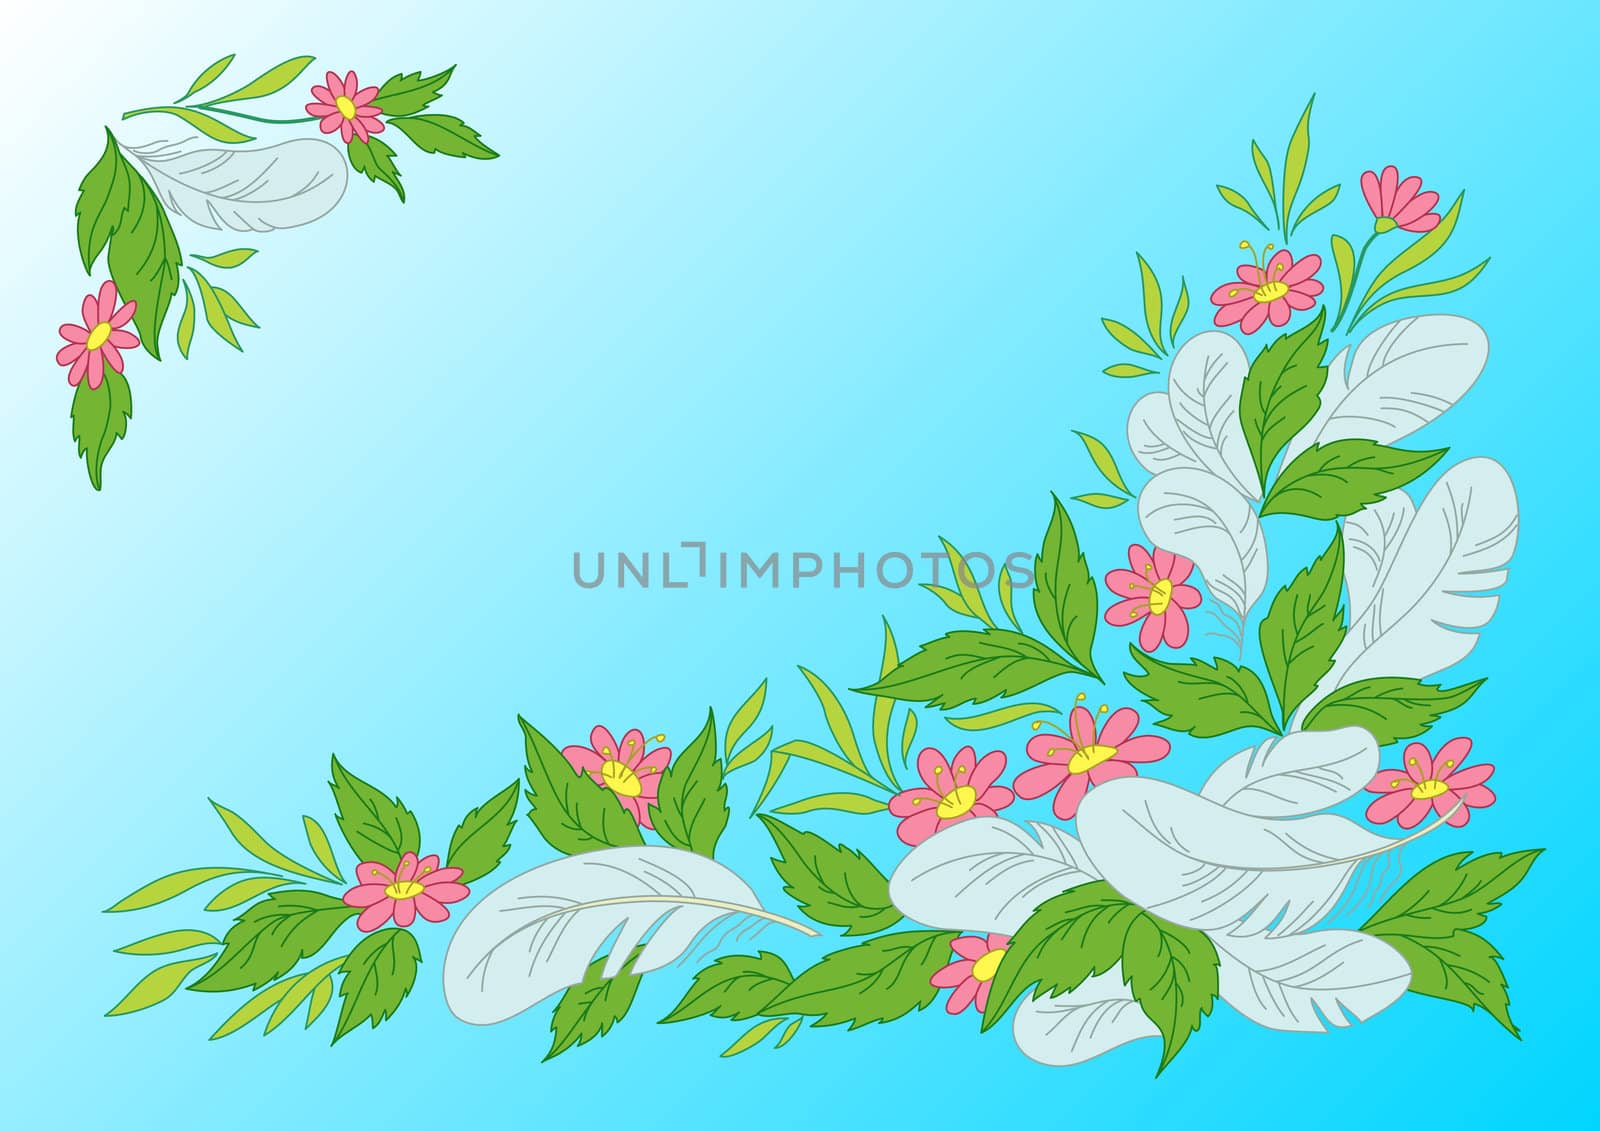 Abstract background, leaves, flowers and feathers on sky